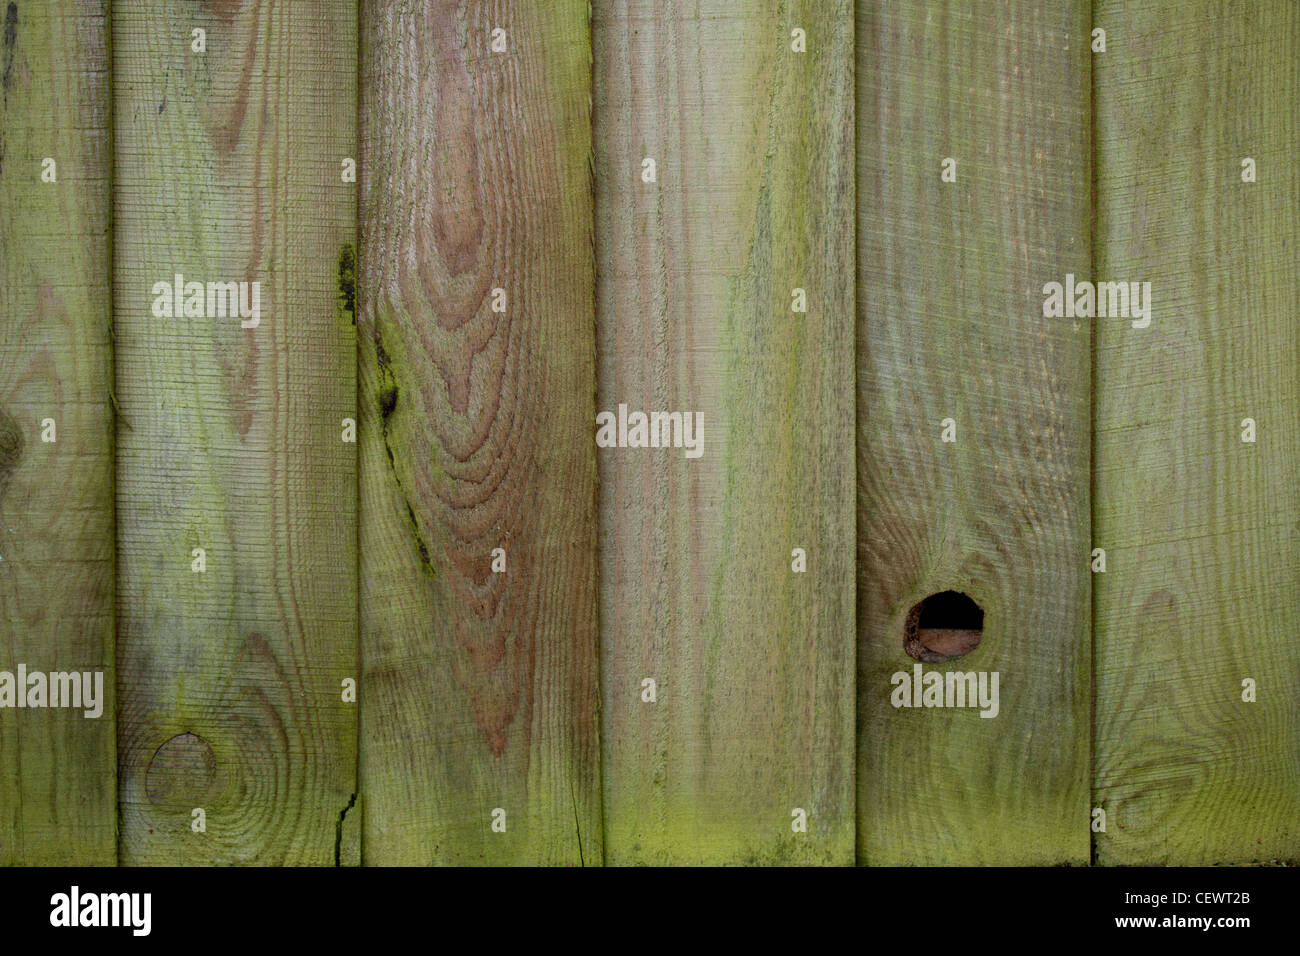 Knotted wooden fence texture with creeping moss Stock Photo